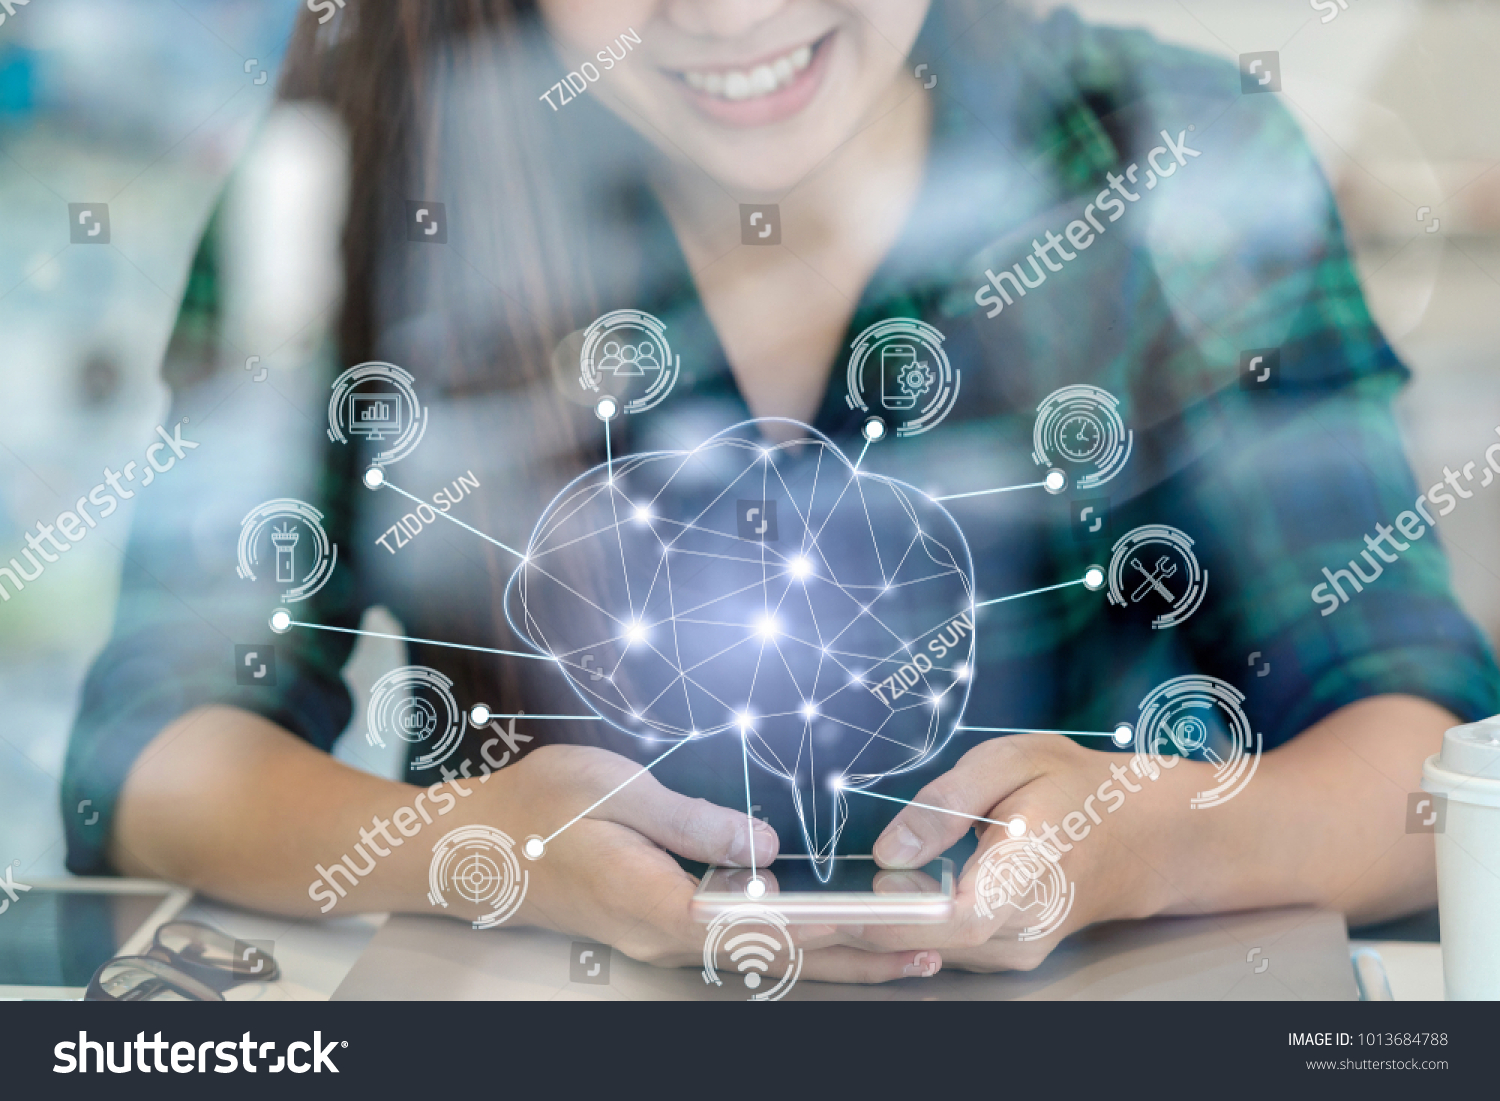 Polygonal brain shape of an artificial intelligence with various icon of smart city Internet of Things Technology over Asian businesswoman hand using the smart mobile phone,AI and business IOT concept #1013684788